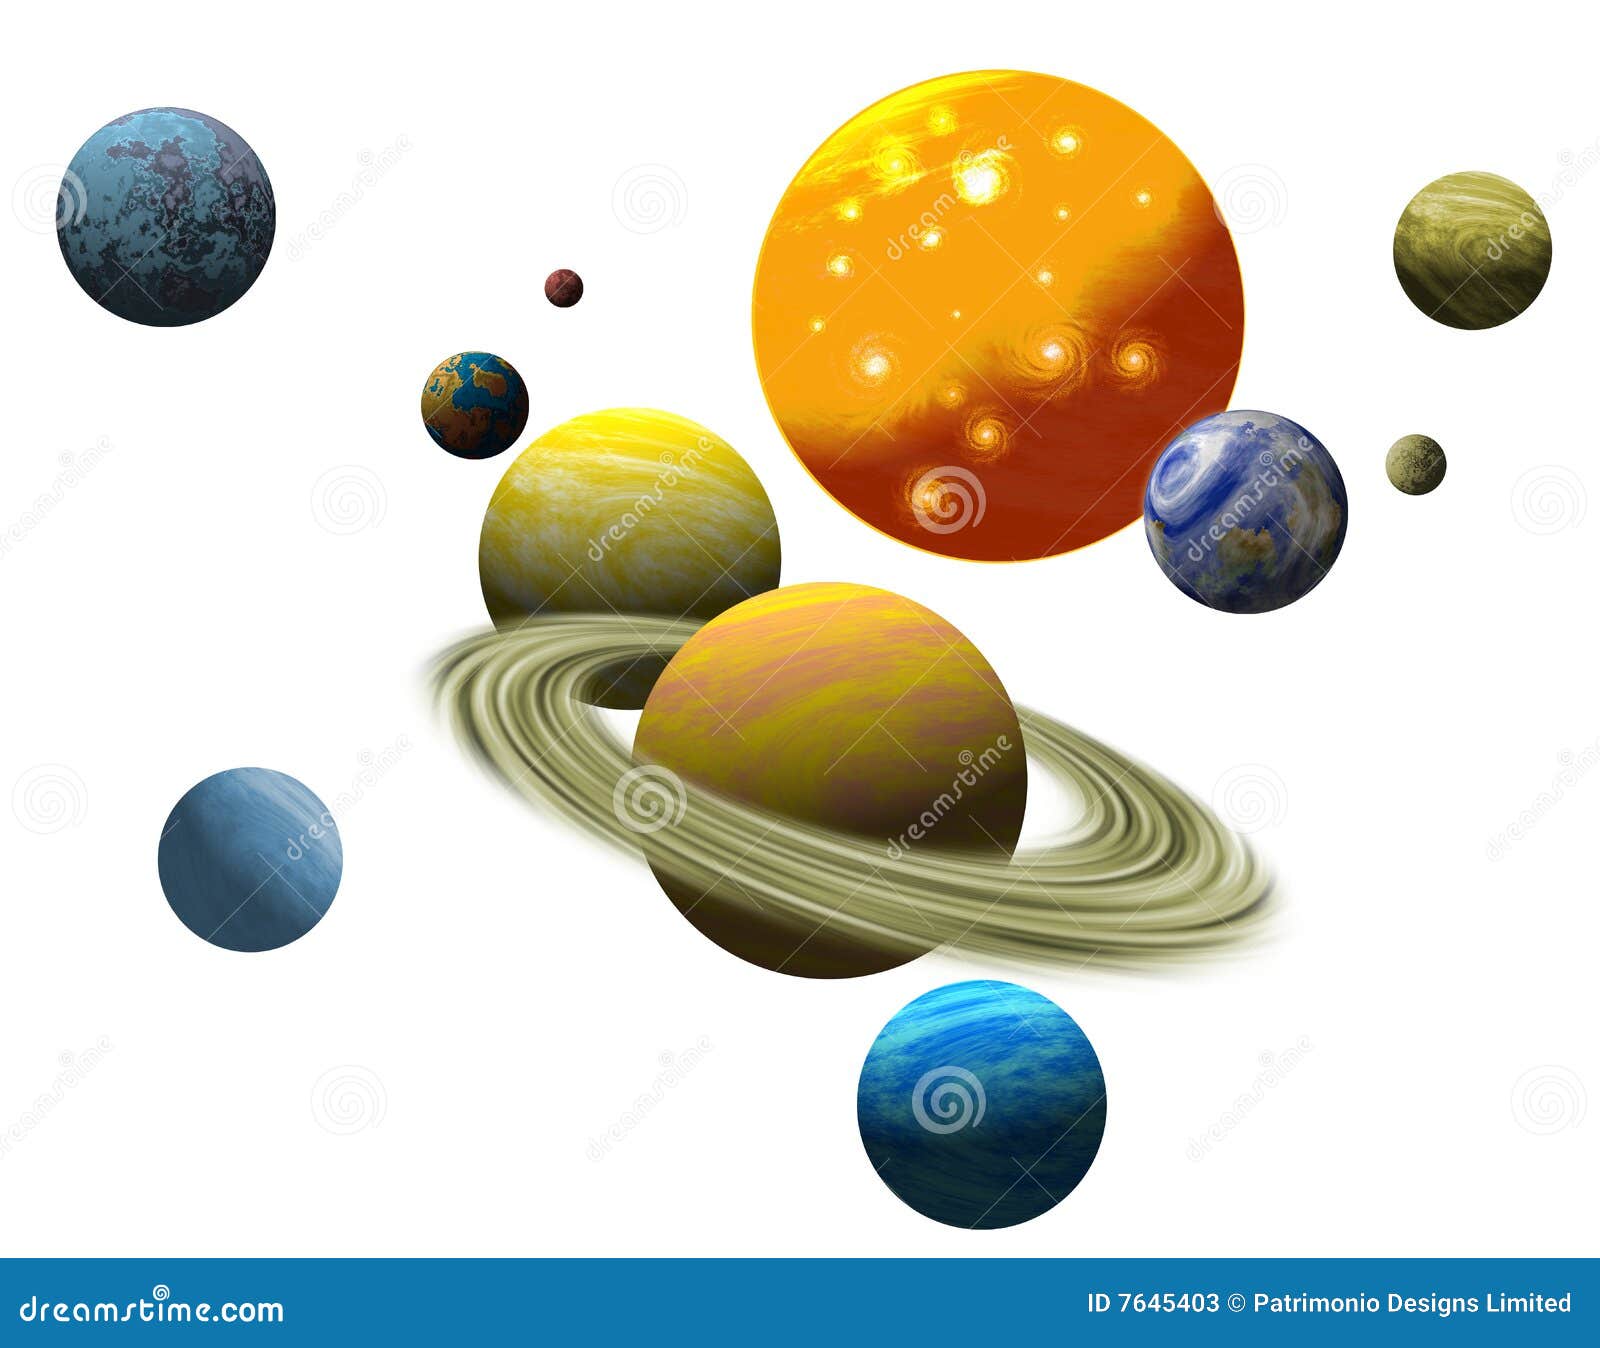 the planetary solar system